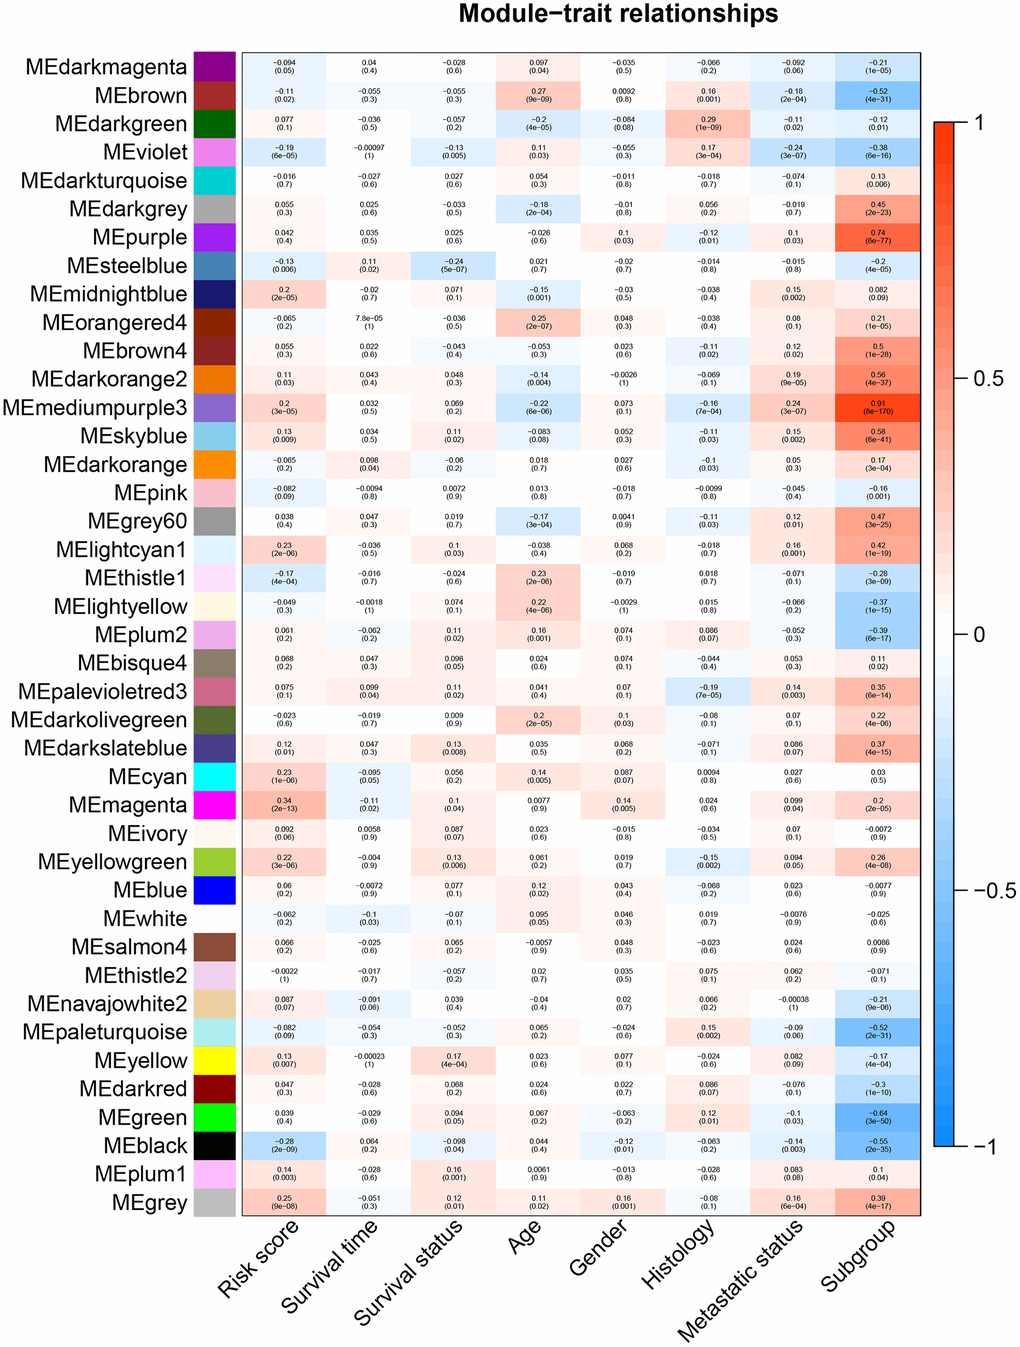 Heatmap of the correlation between gene modules and clinical traits of MB. Each row in the heatmap corresponds to a module, and each column in the heatmap corresponds to a specific clinical characteristic. Each cell contains the corresponding correlation coefficient and p-value.